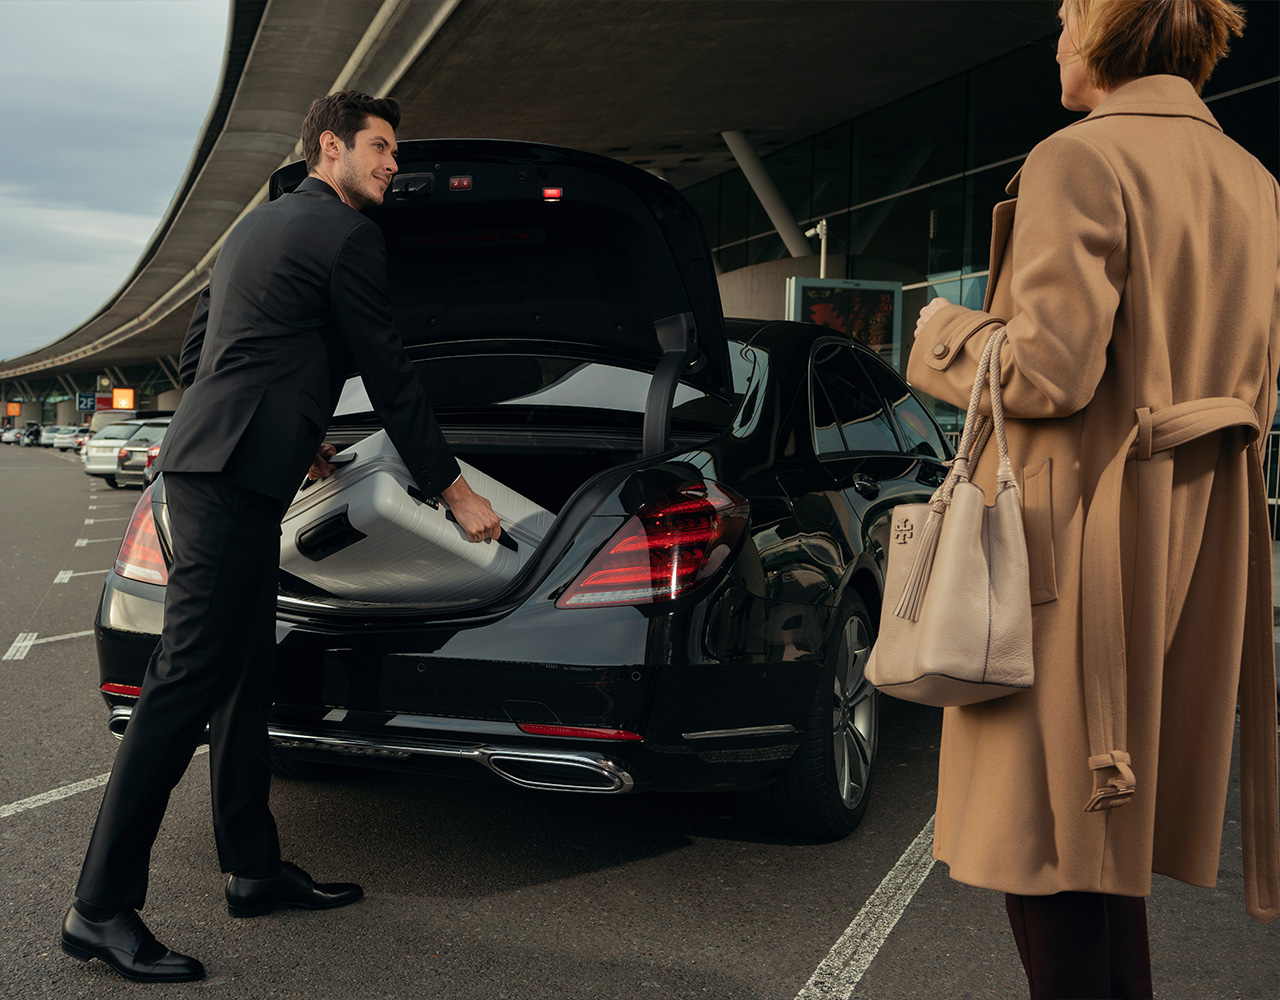 A Blacklane chauffeur in a black suit and tie waits outside arrivals with a tablet pickup sign saying Mr. Doe.